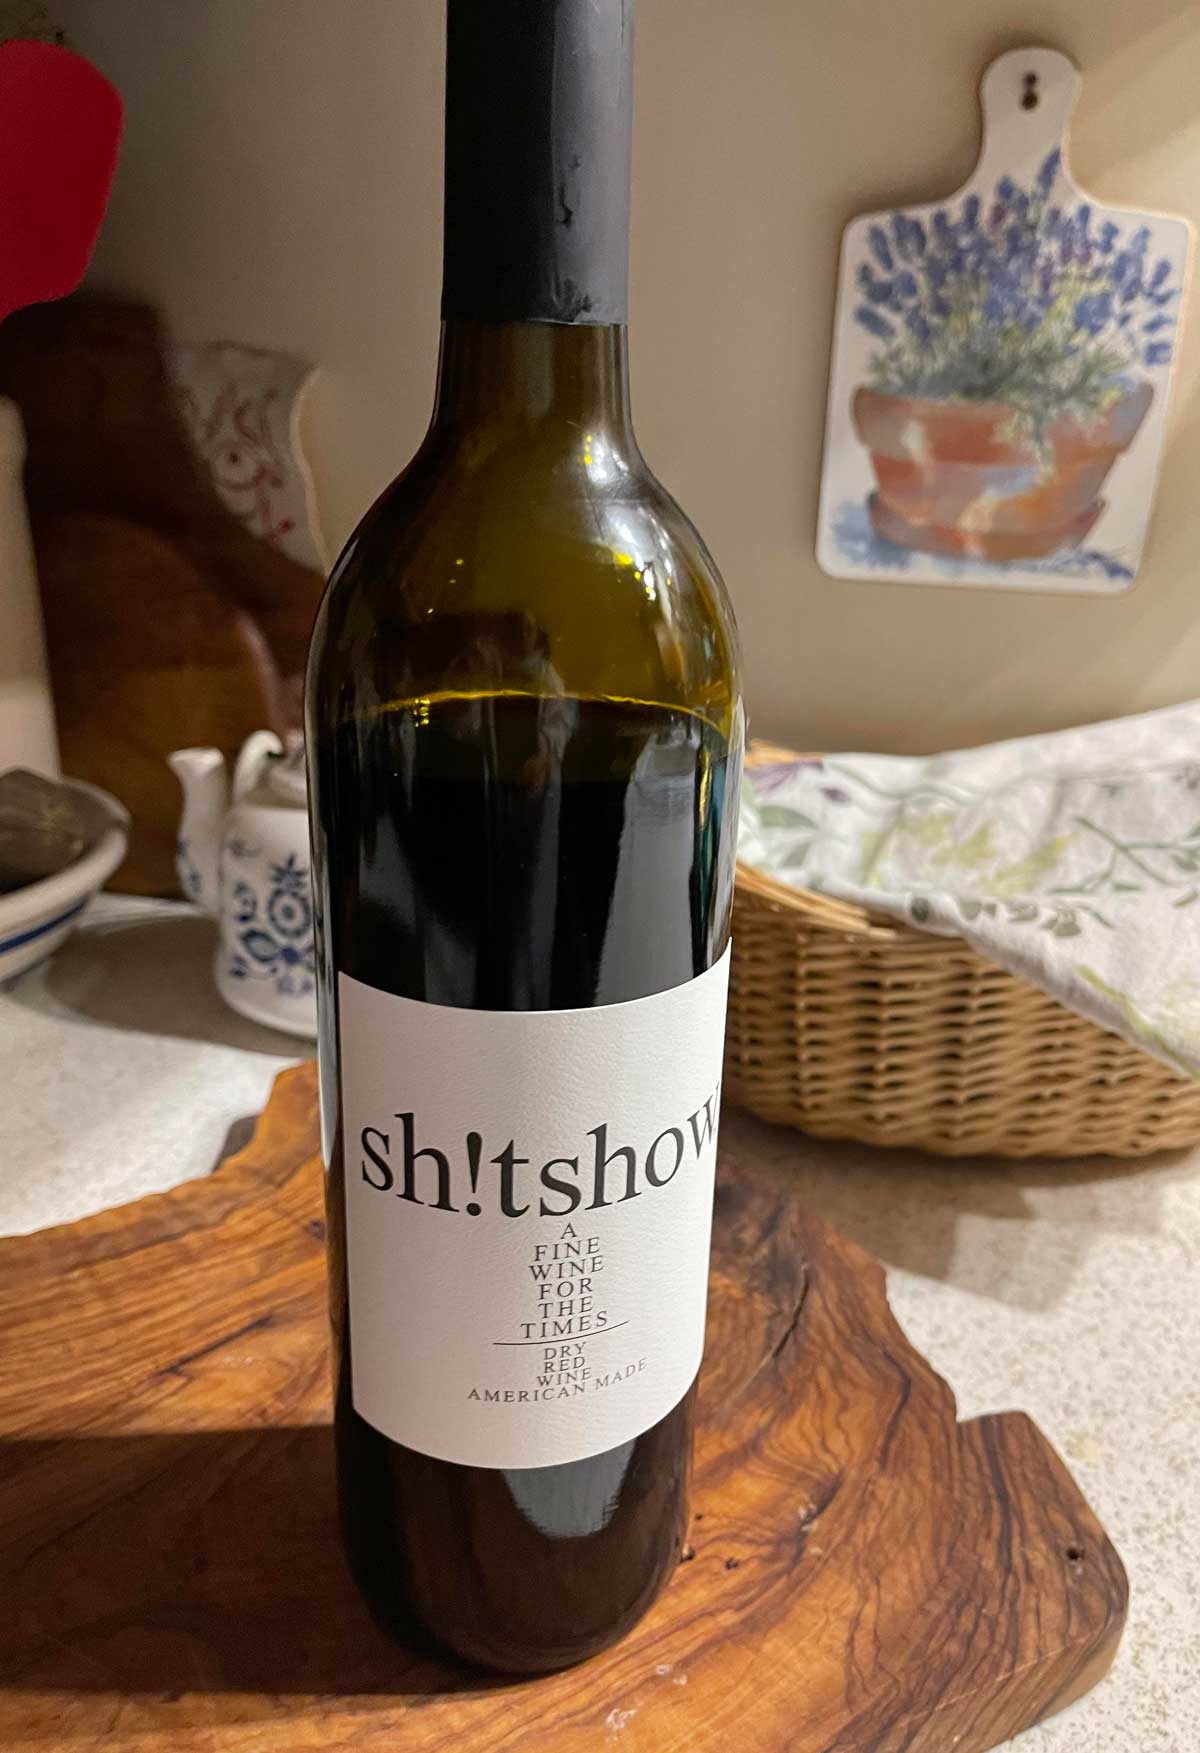 A fine wine for the times